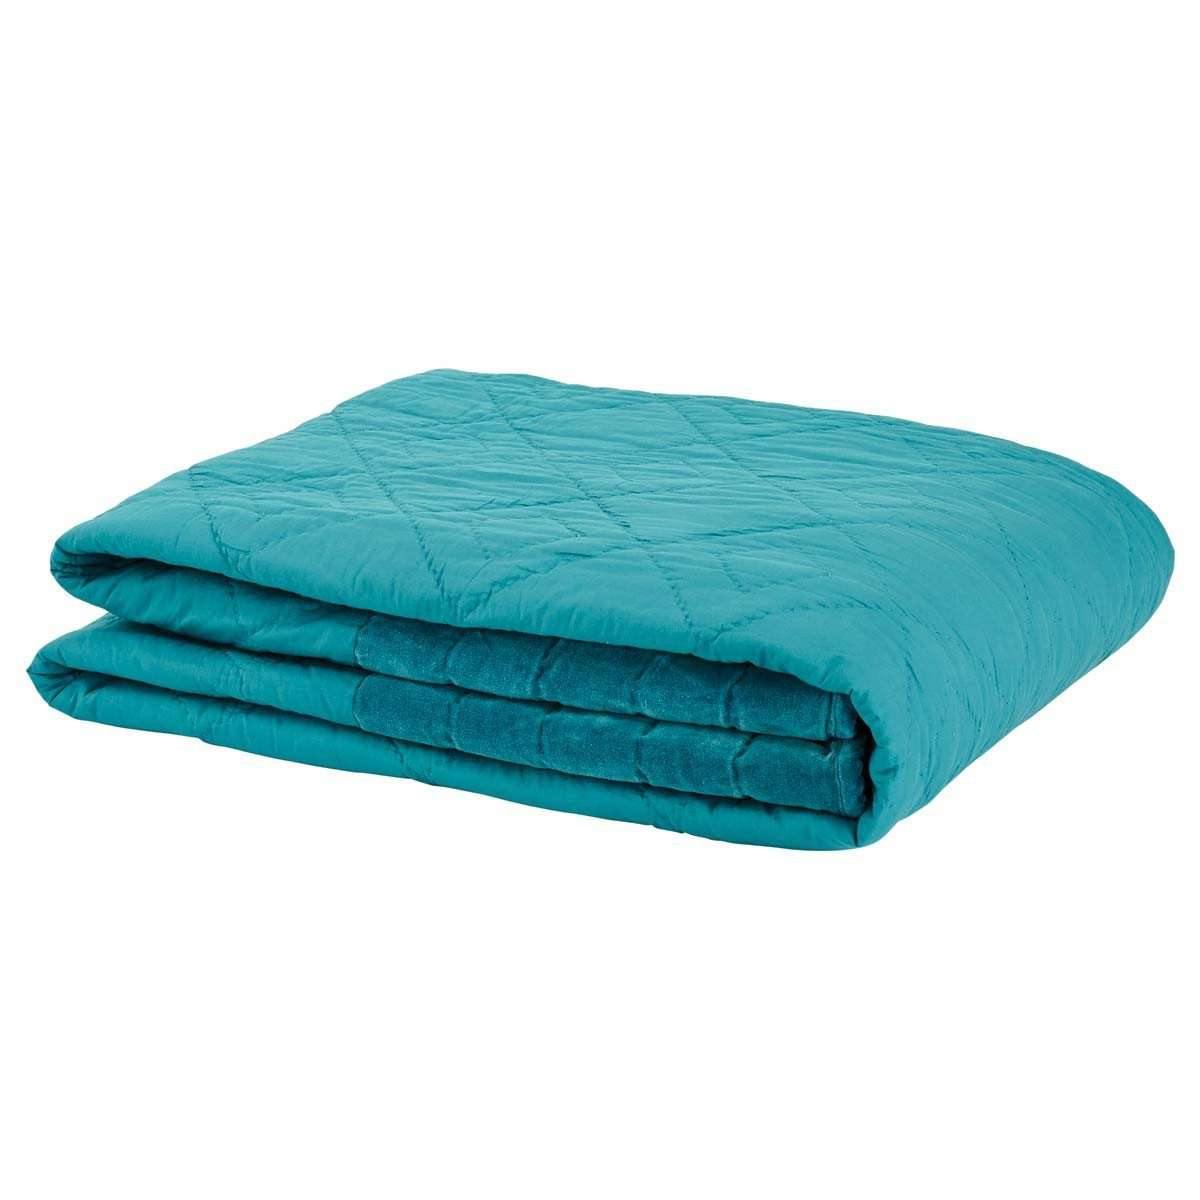 Eleanor Teal Queen Quilt 90Wx90L VHC Brands folded